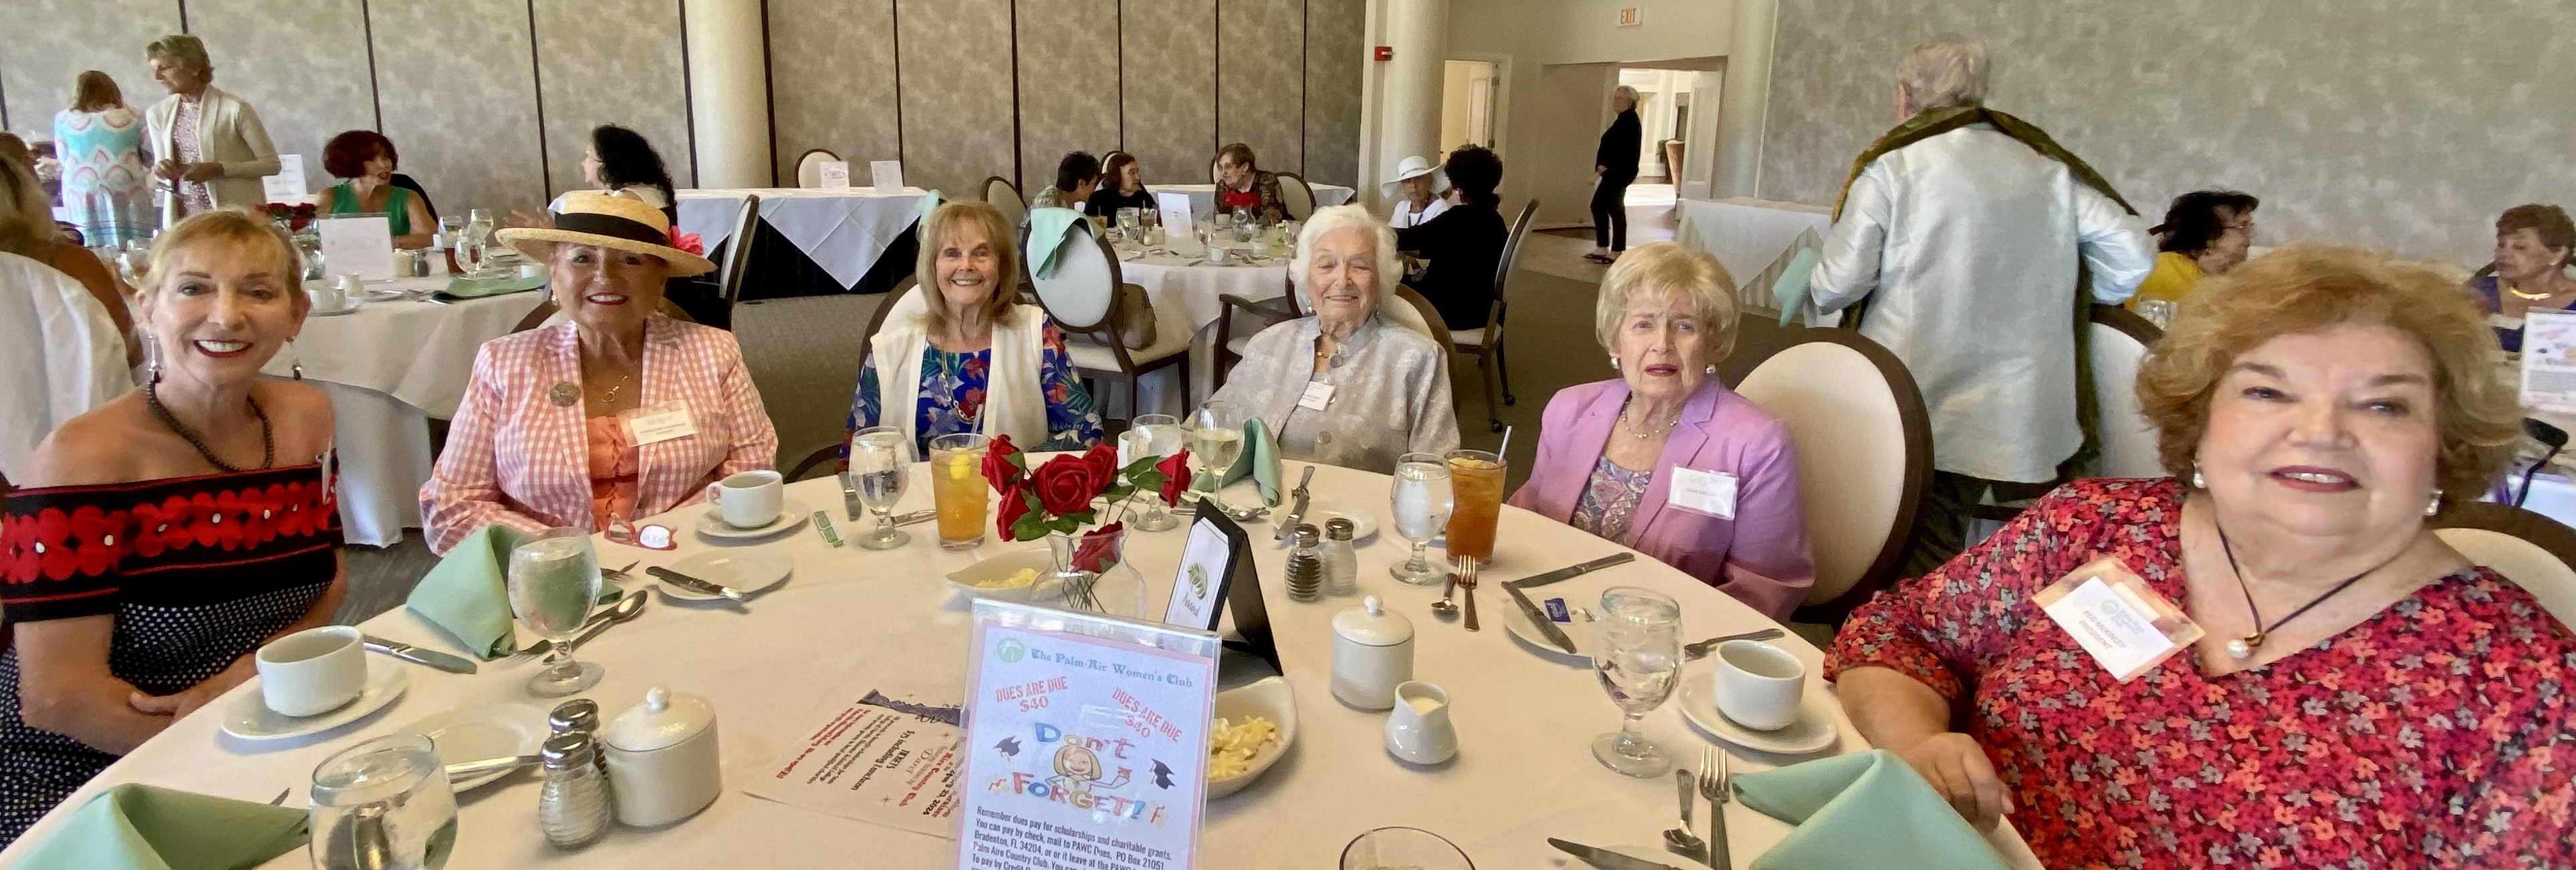 Past PAWC presidents gathered to support Peg McKinley as she was sworn in for a third term.  Left to right- Michelle Crabtree, Carolann Garafola, Beverly Allen, Doris McCowen, Joan Greene and Peg McKinley.